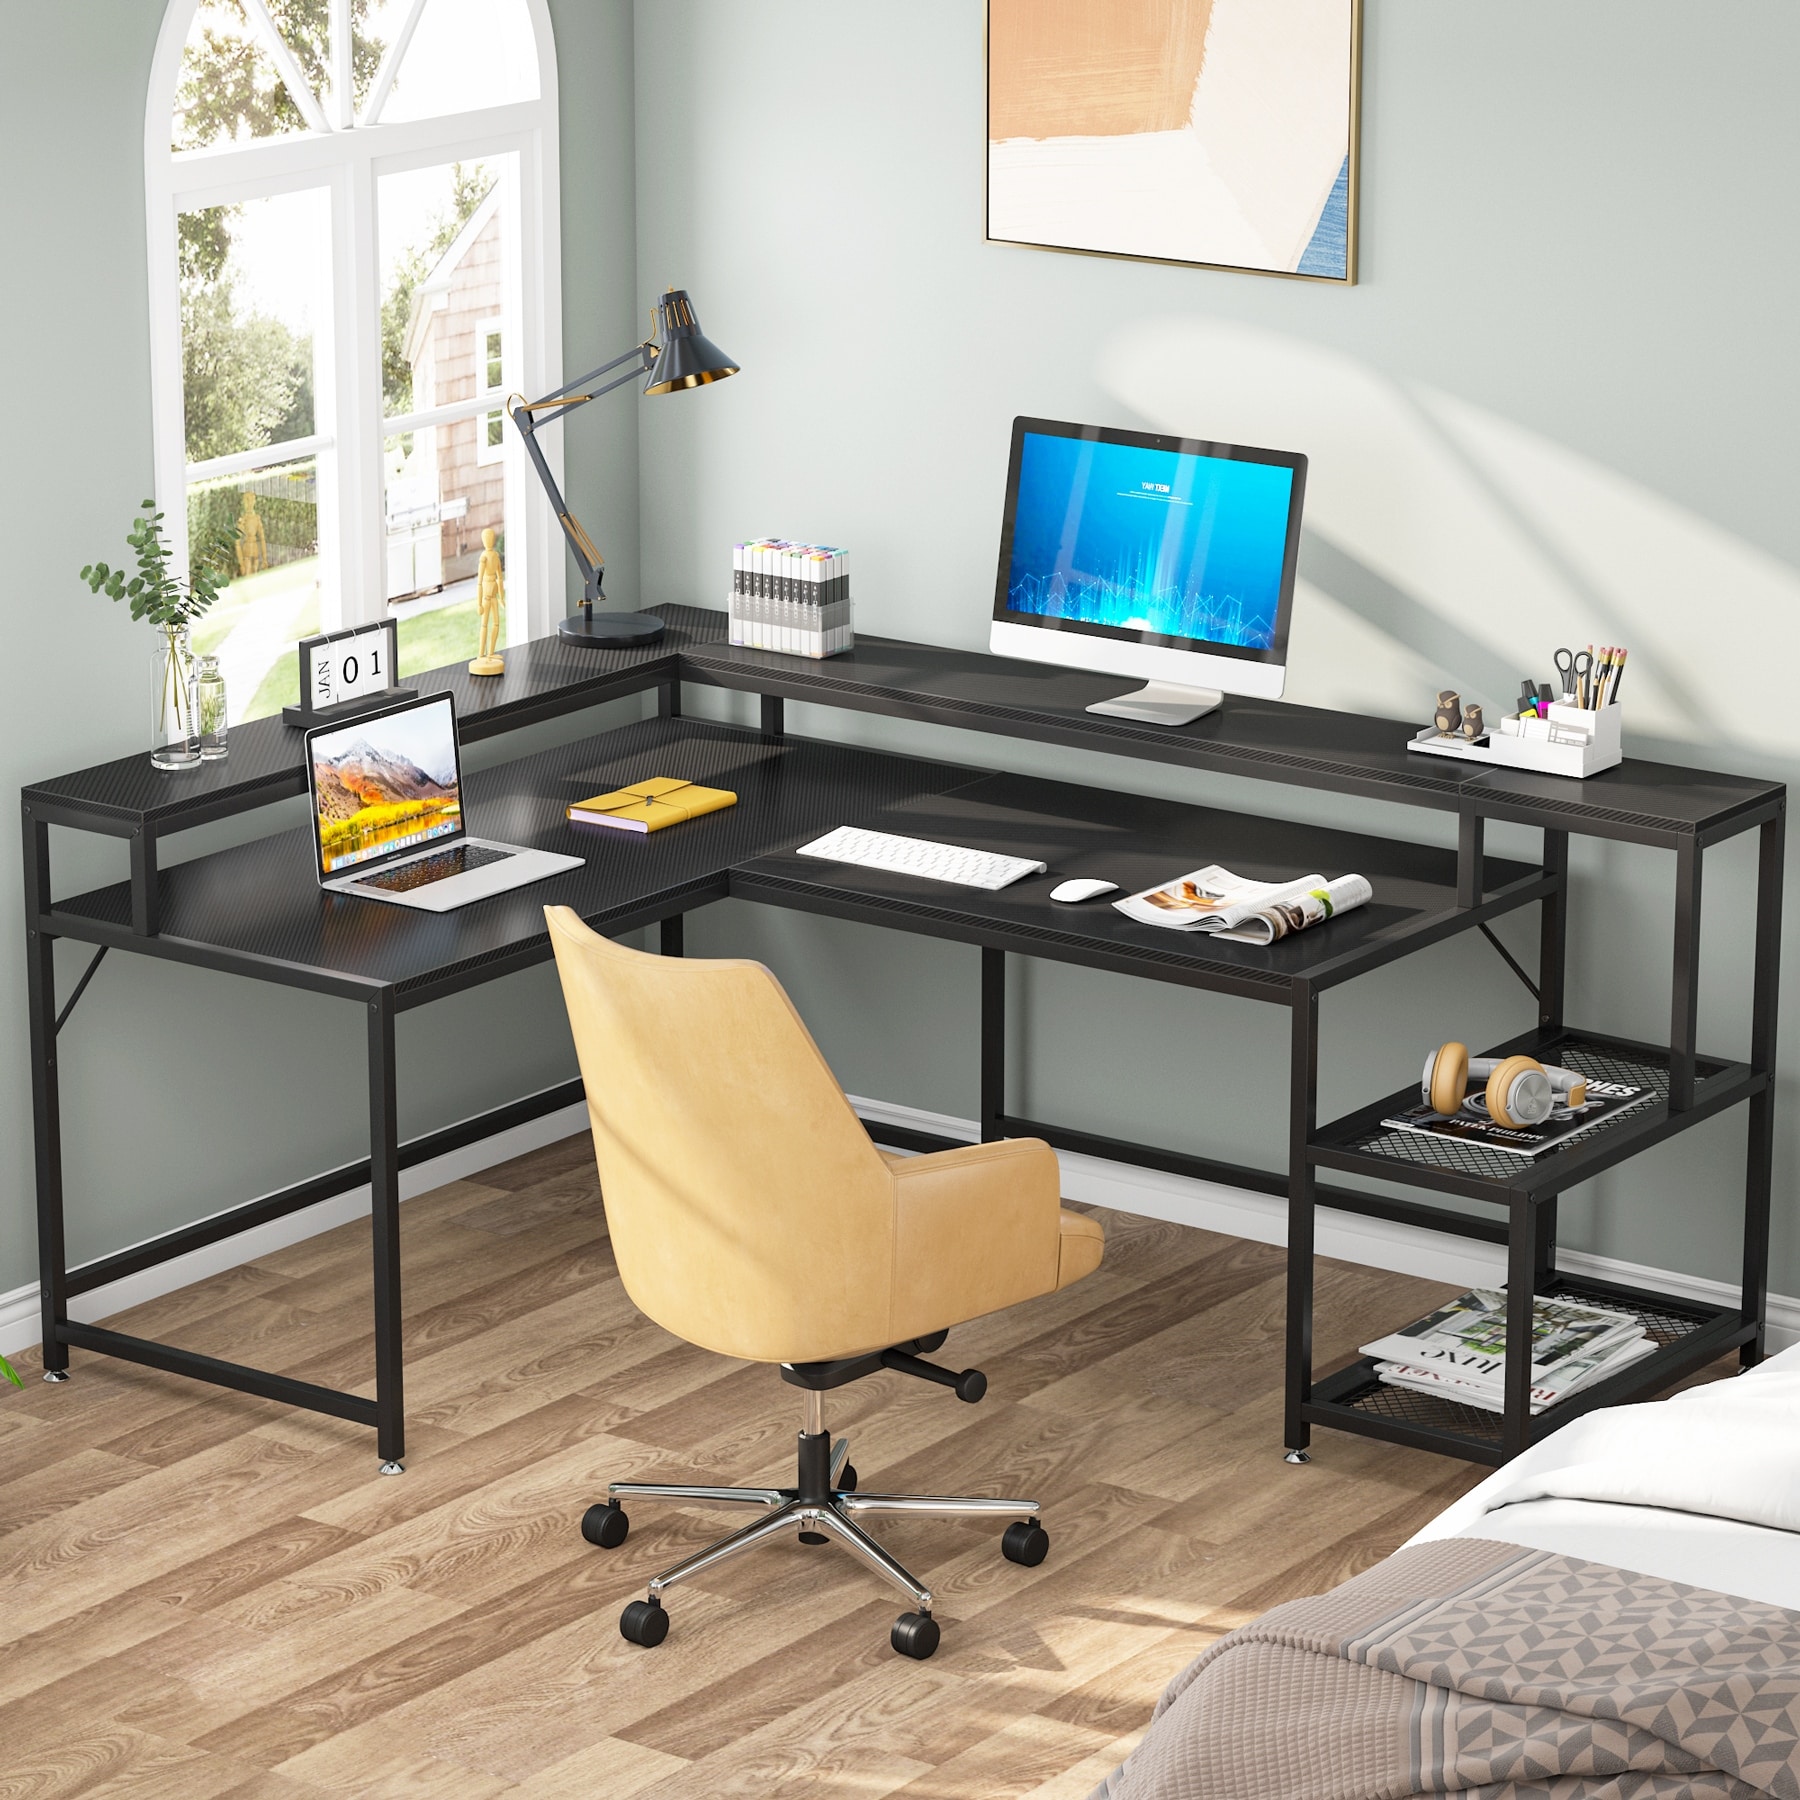 https://ak1.ostkcdn.com/images/products/is/images/direct/ac75f354bd3f5698ce0d6f2678d985f7ca978ed9/69%22-L-Shaped-Desk-with-Monitor-Shelf%2C-Reversible-Corner-Computer-Desk-for-Office-Home.jpg